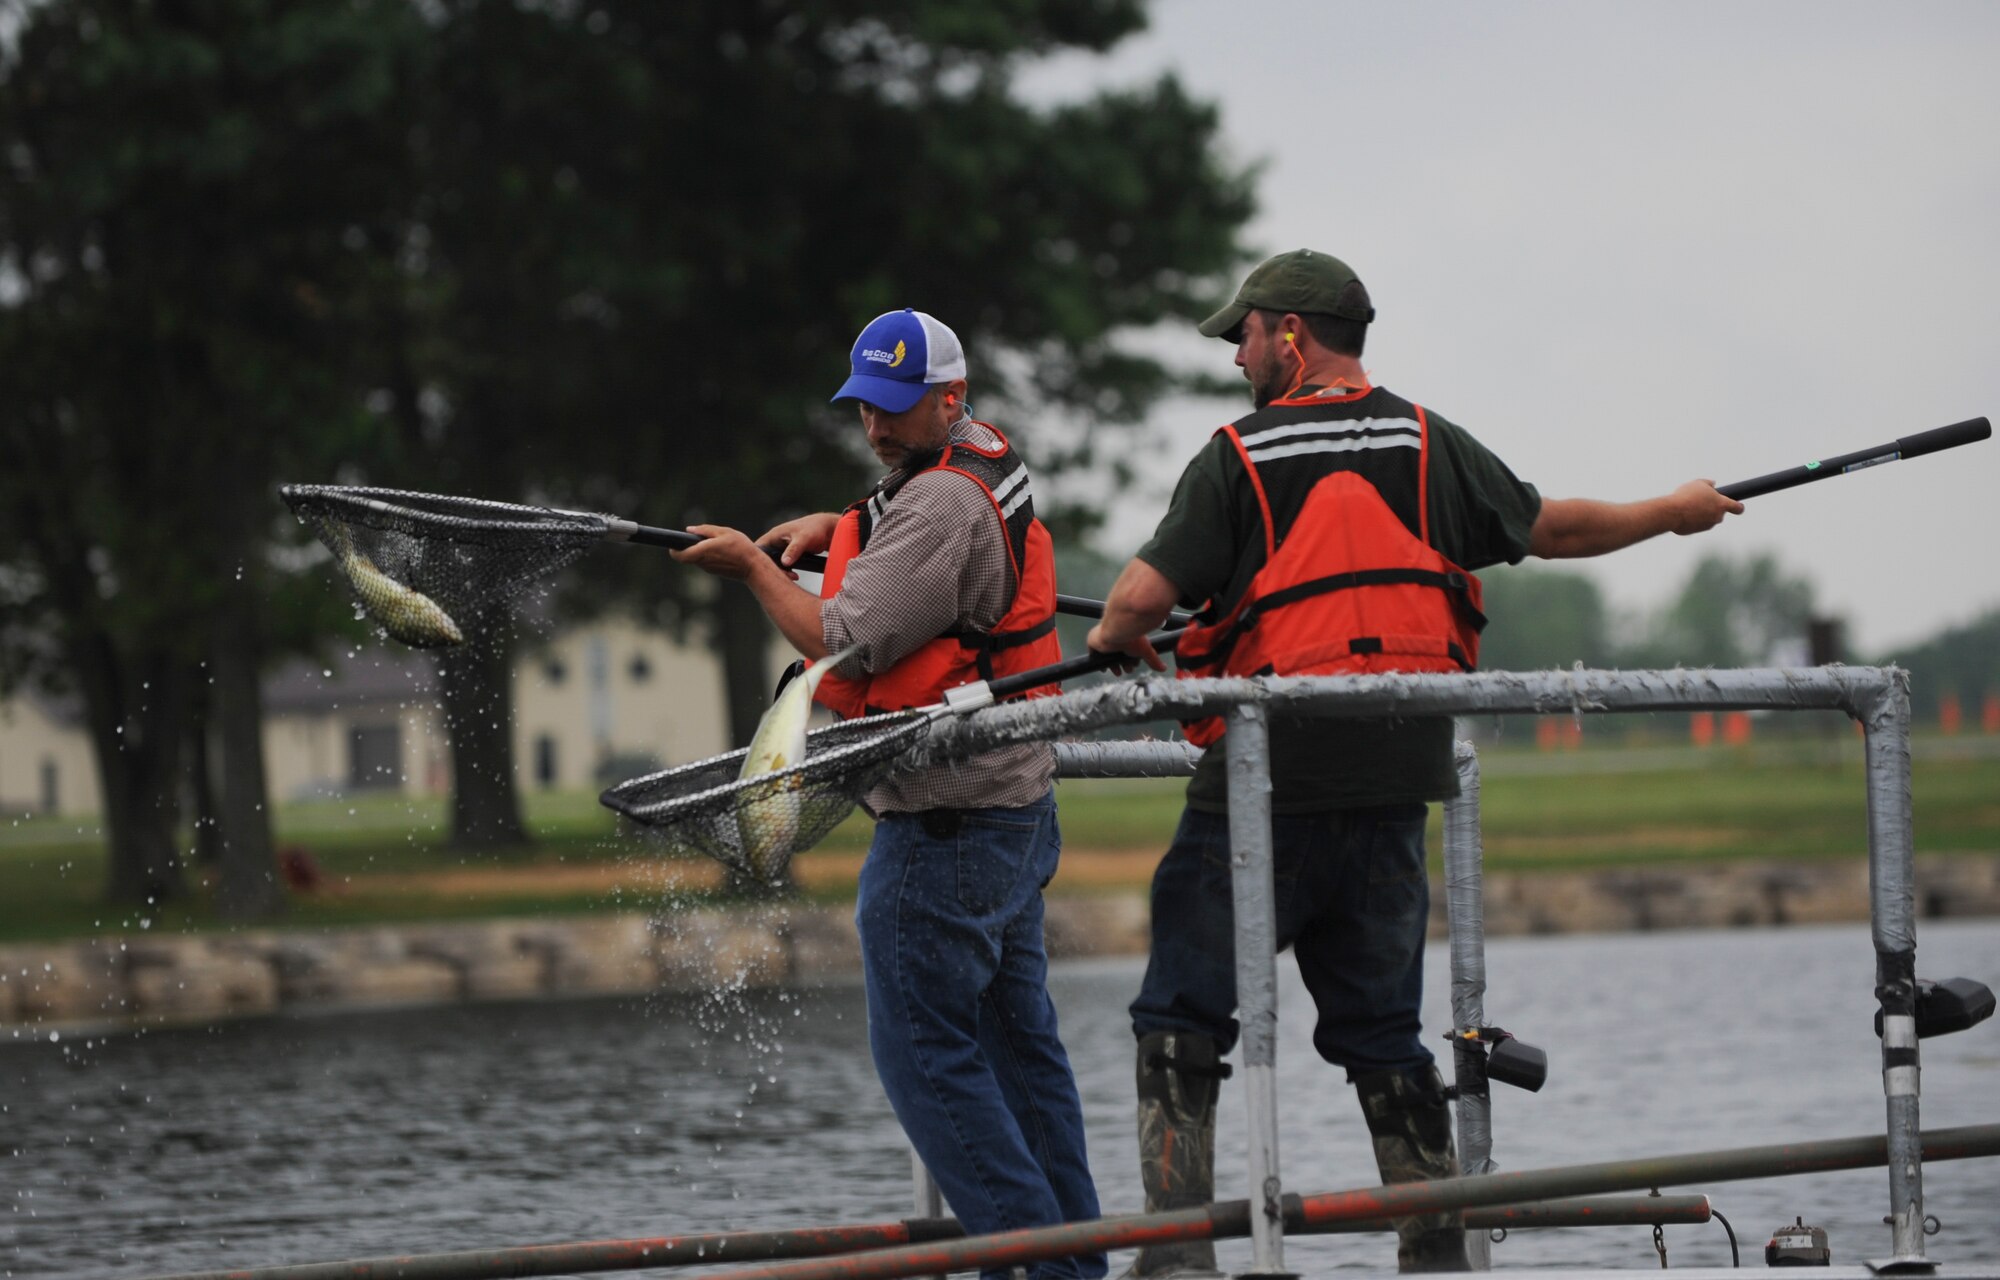 Keith Donaldson, left, a natural resource manager assigned to the 509th Civil Engineer Squadron, and Ty Cravens, right, a resource assistant with the Missouri Department of Conservation, collect fish from Ike Skelton Lake at Whiteman Air Force Base, Mo., June 21, 2016. From the data they collected, the team determined which fish needed to be added to the lake to balance out the ecosystem. (U.S. Air Force photo by Senior Airman Danielle Quilla)